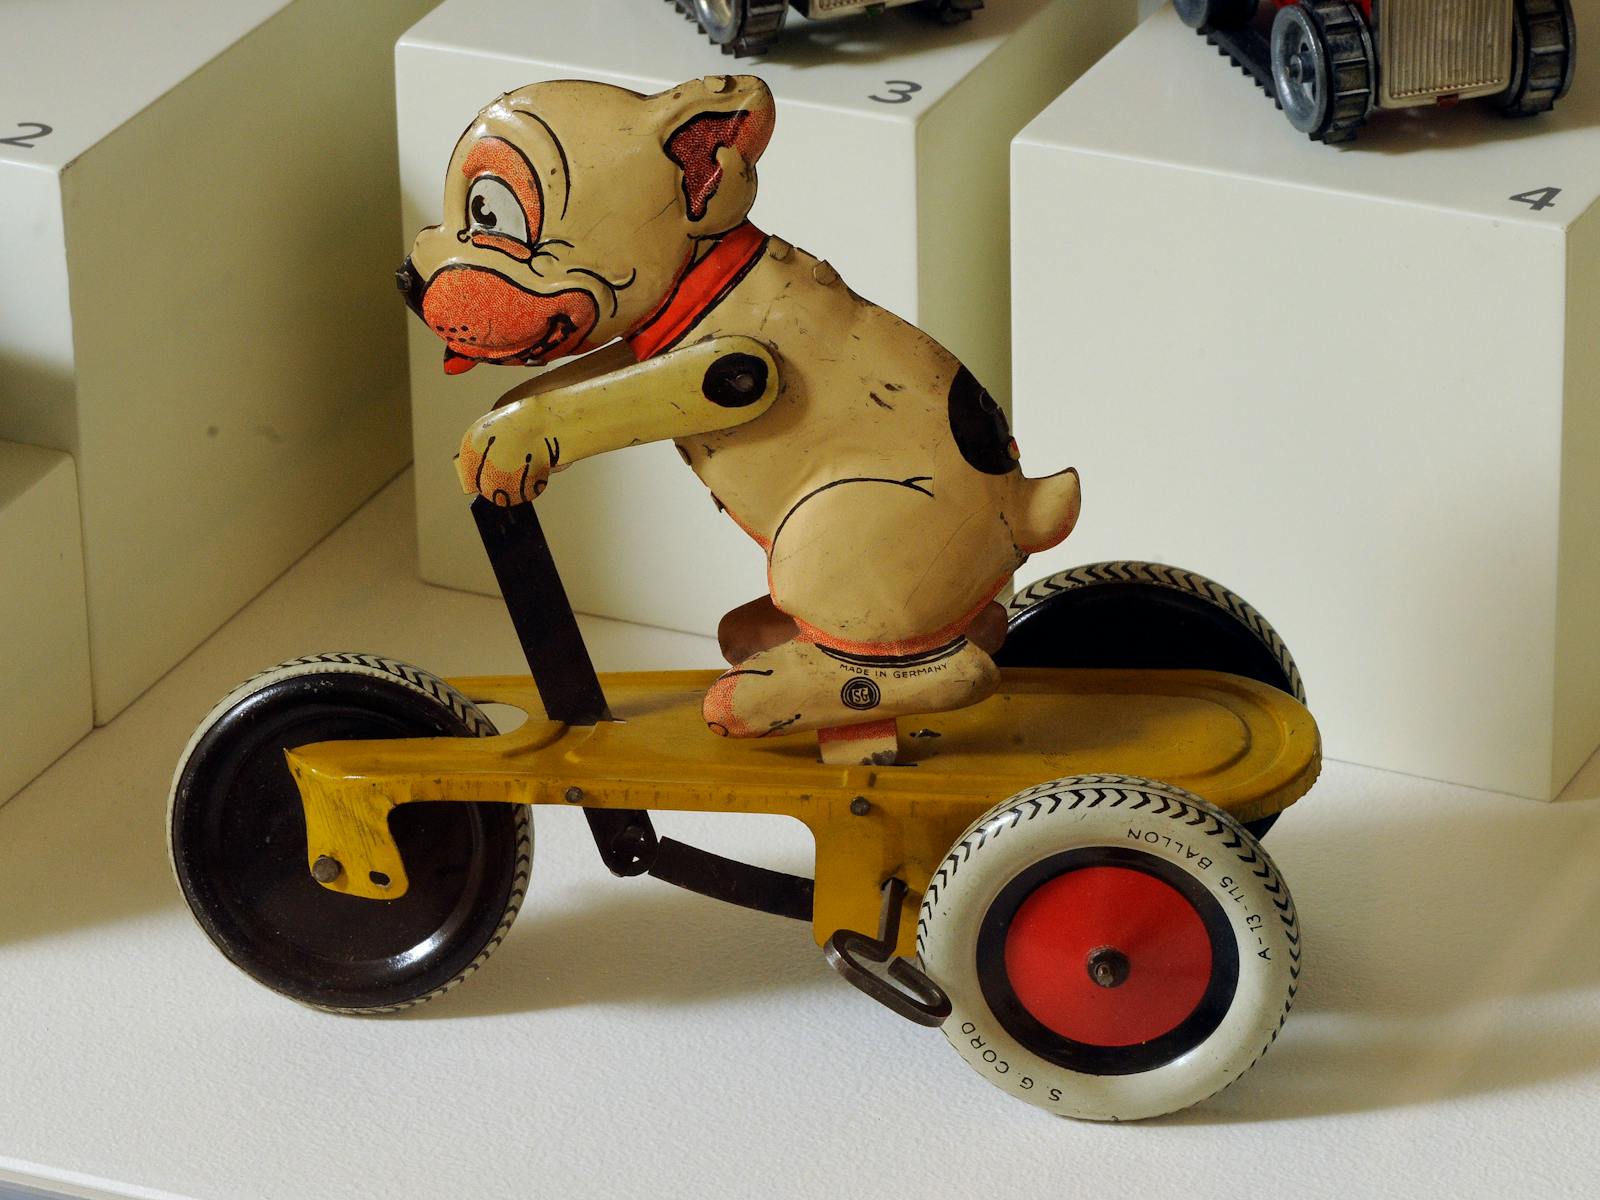 Tin toy c1930, dog on a motor bike, owned by Henry Baldwin (1919-2007)